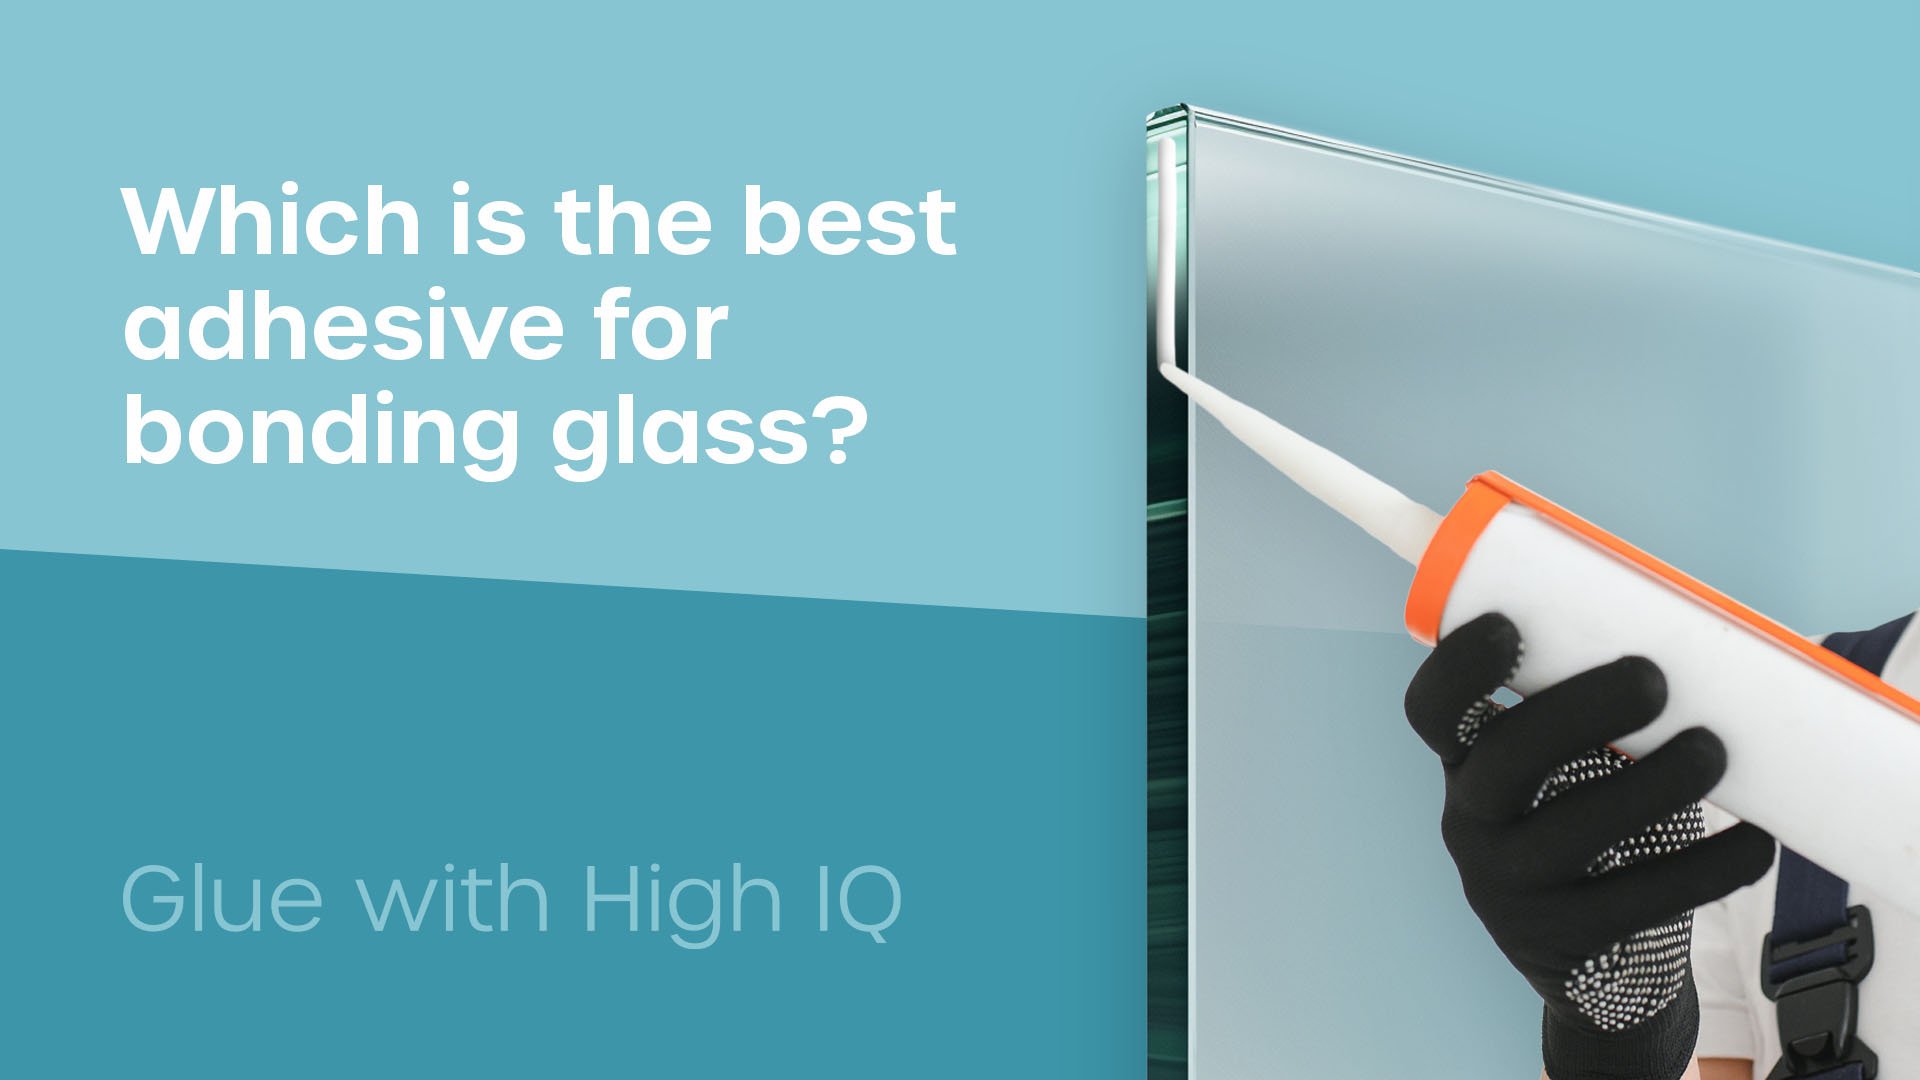 Which is the best glue for bonding glass